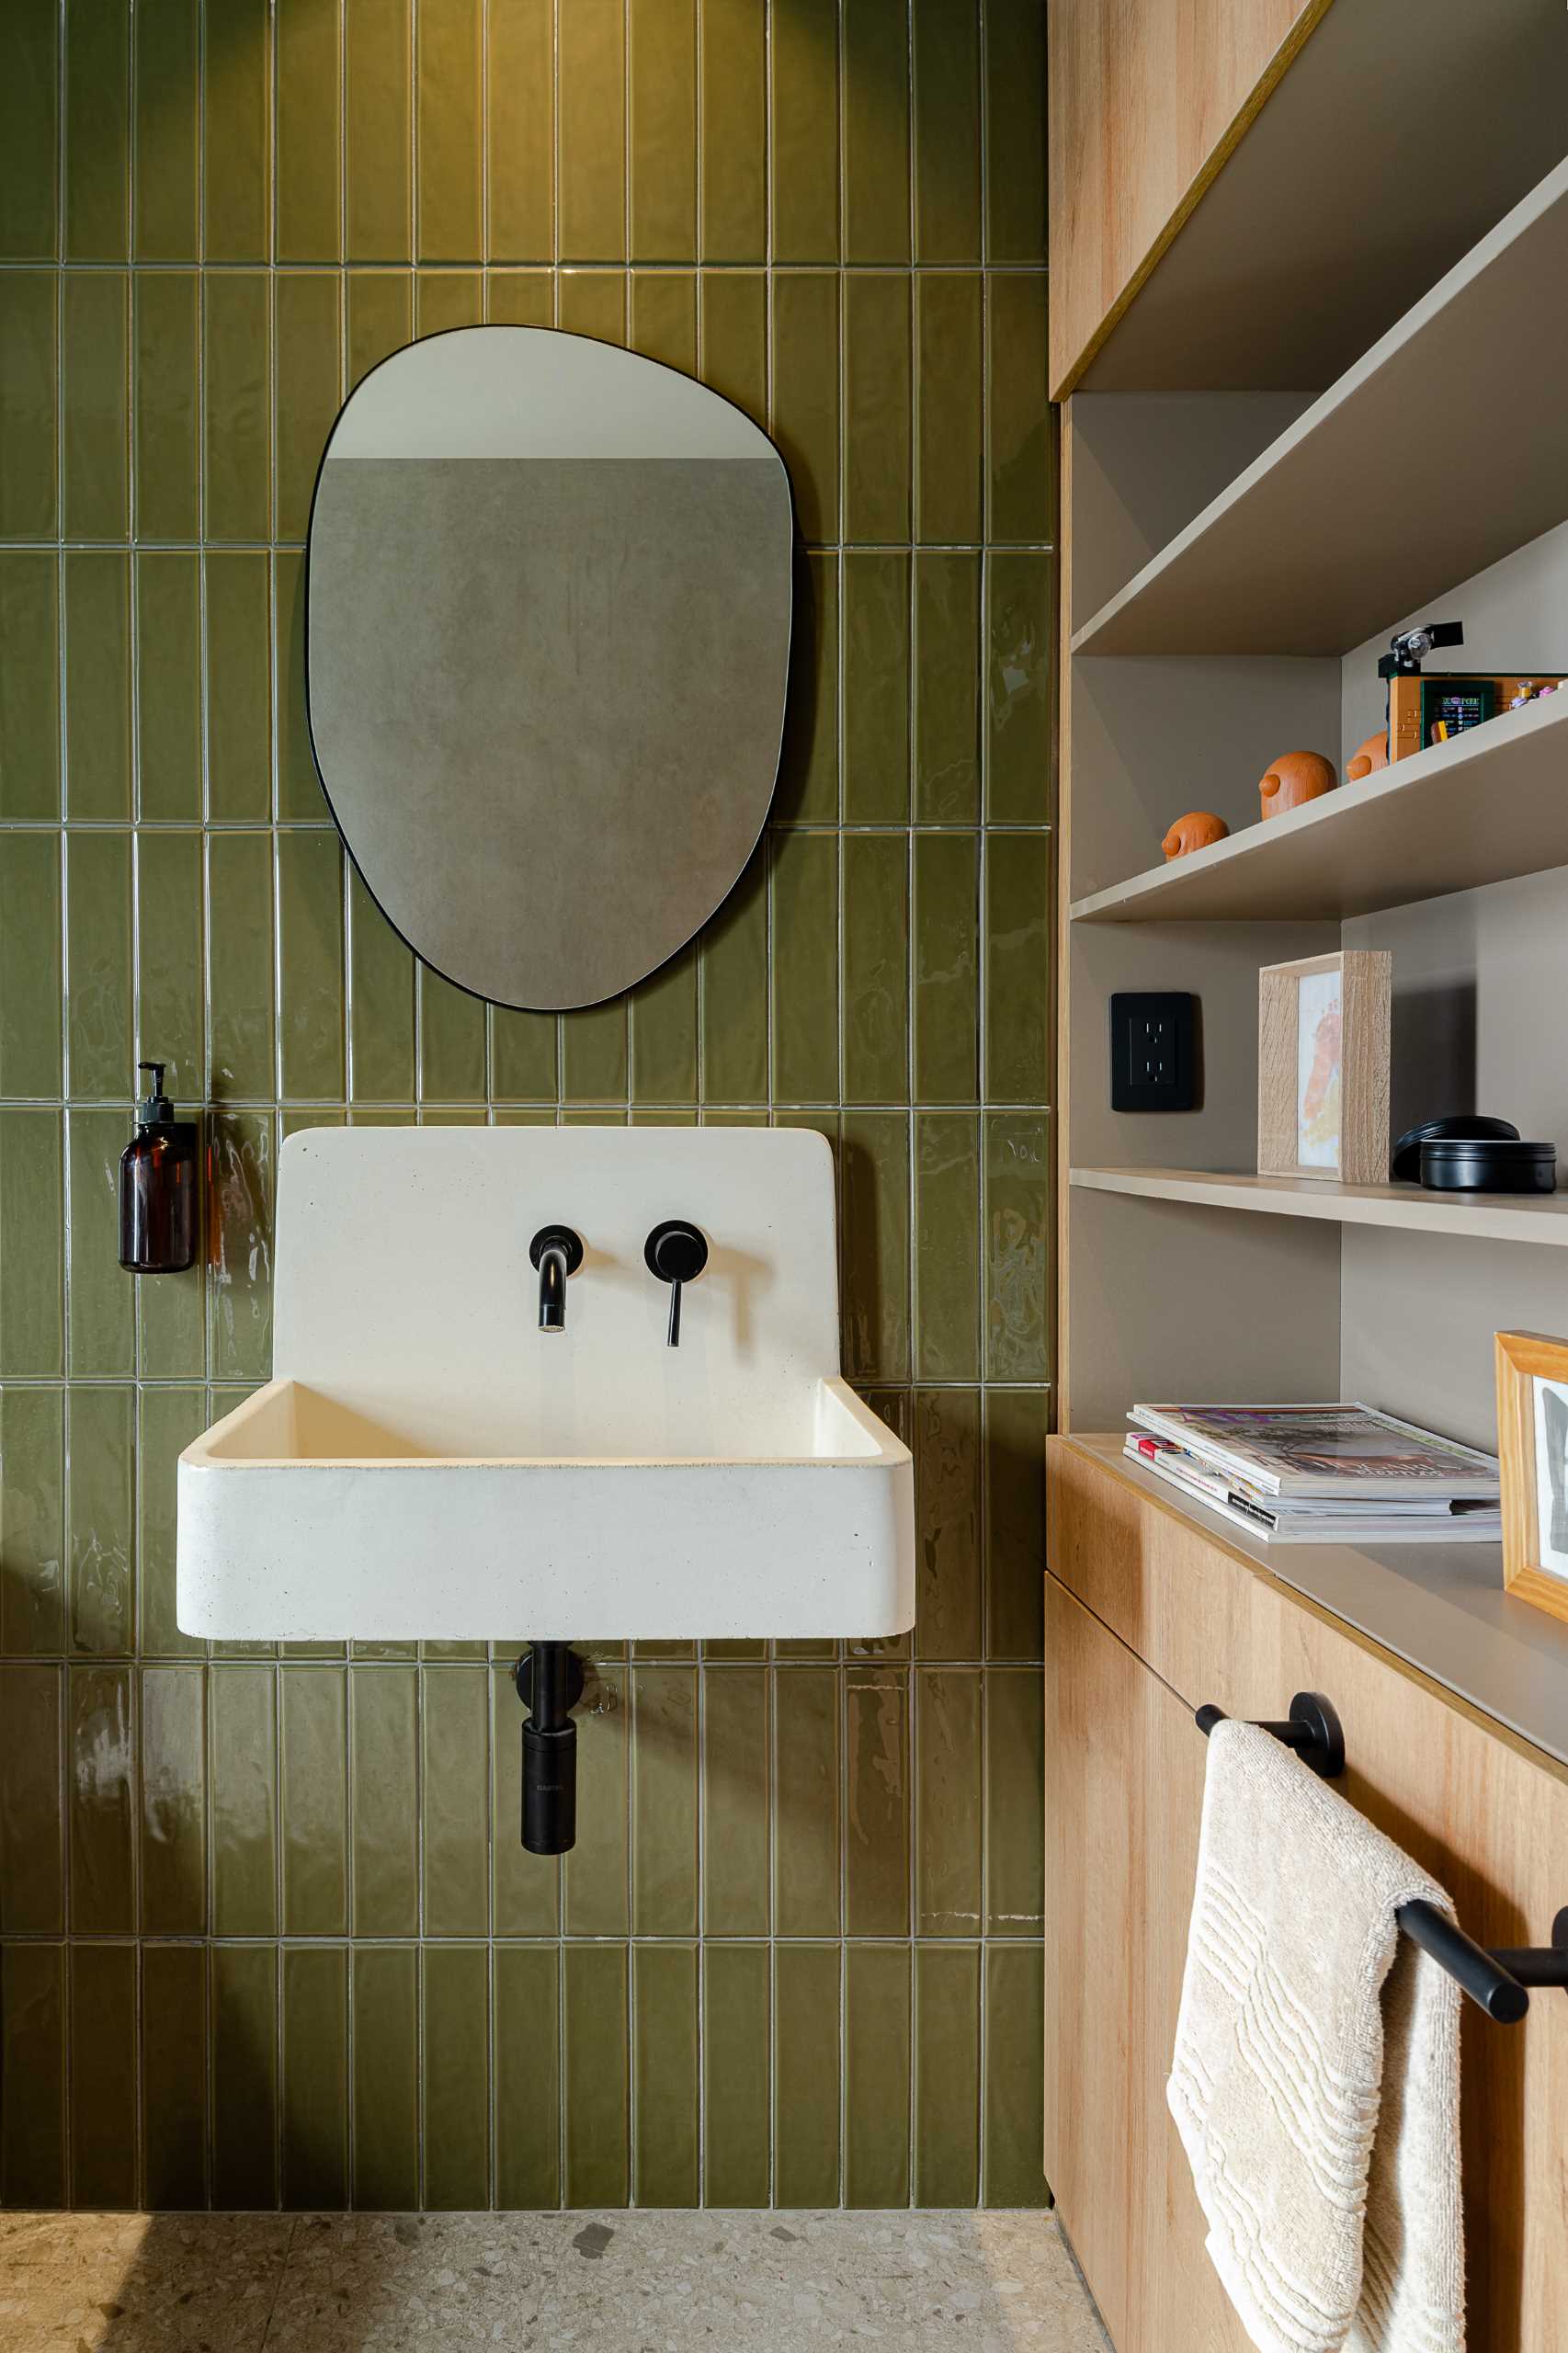 A modern bathroom with vertical green wall tiles, a white basin, and a built-in wood storage unit with open shelves.